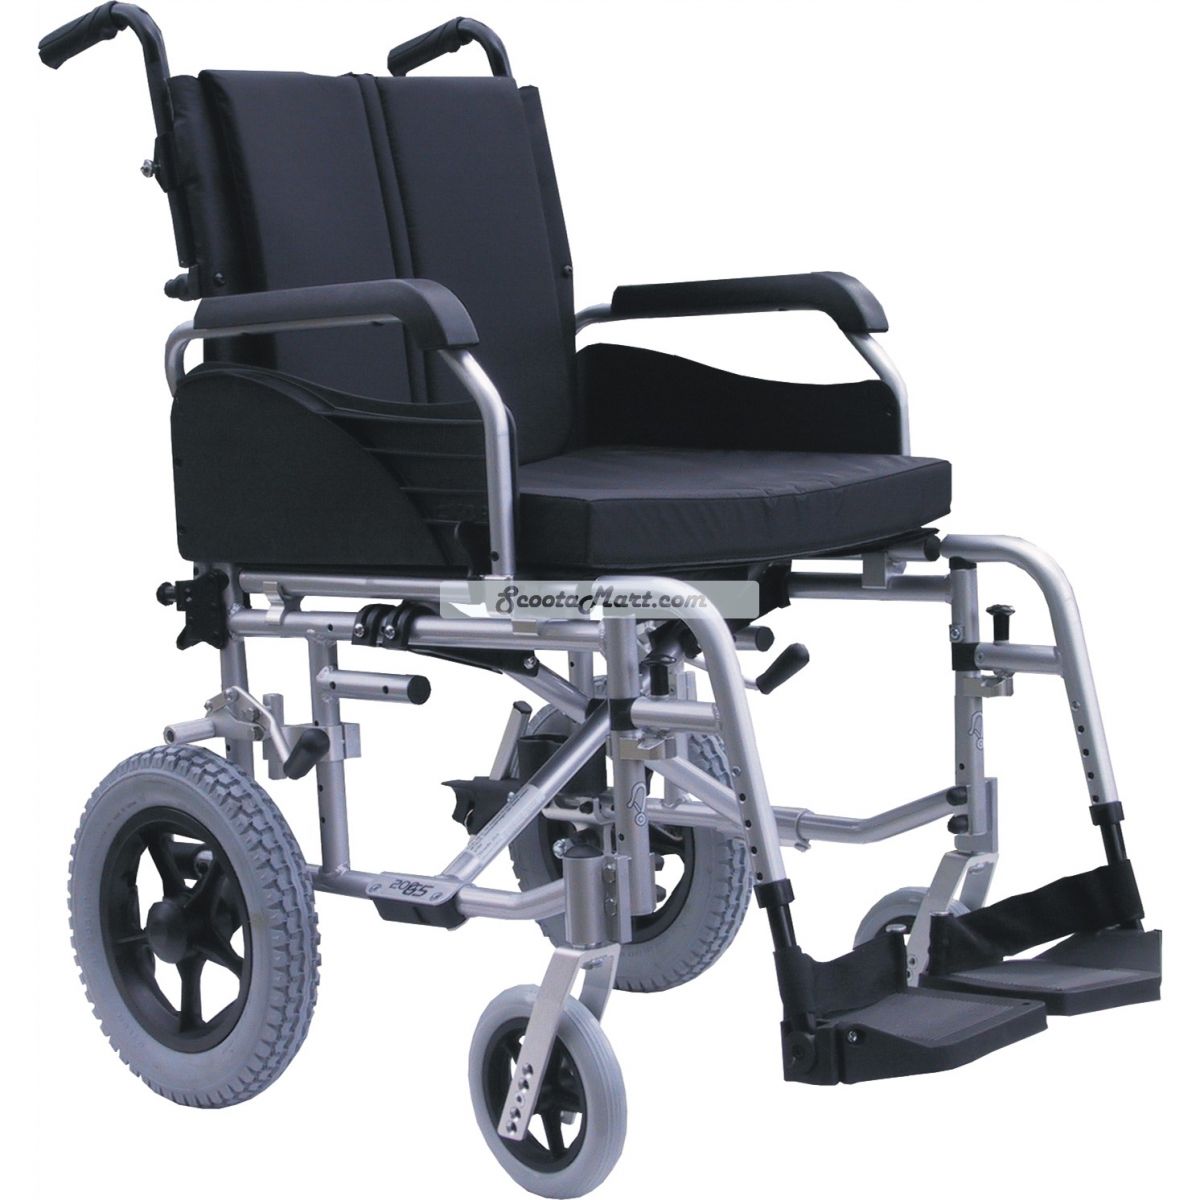 wheelchair icon. Download PNG